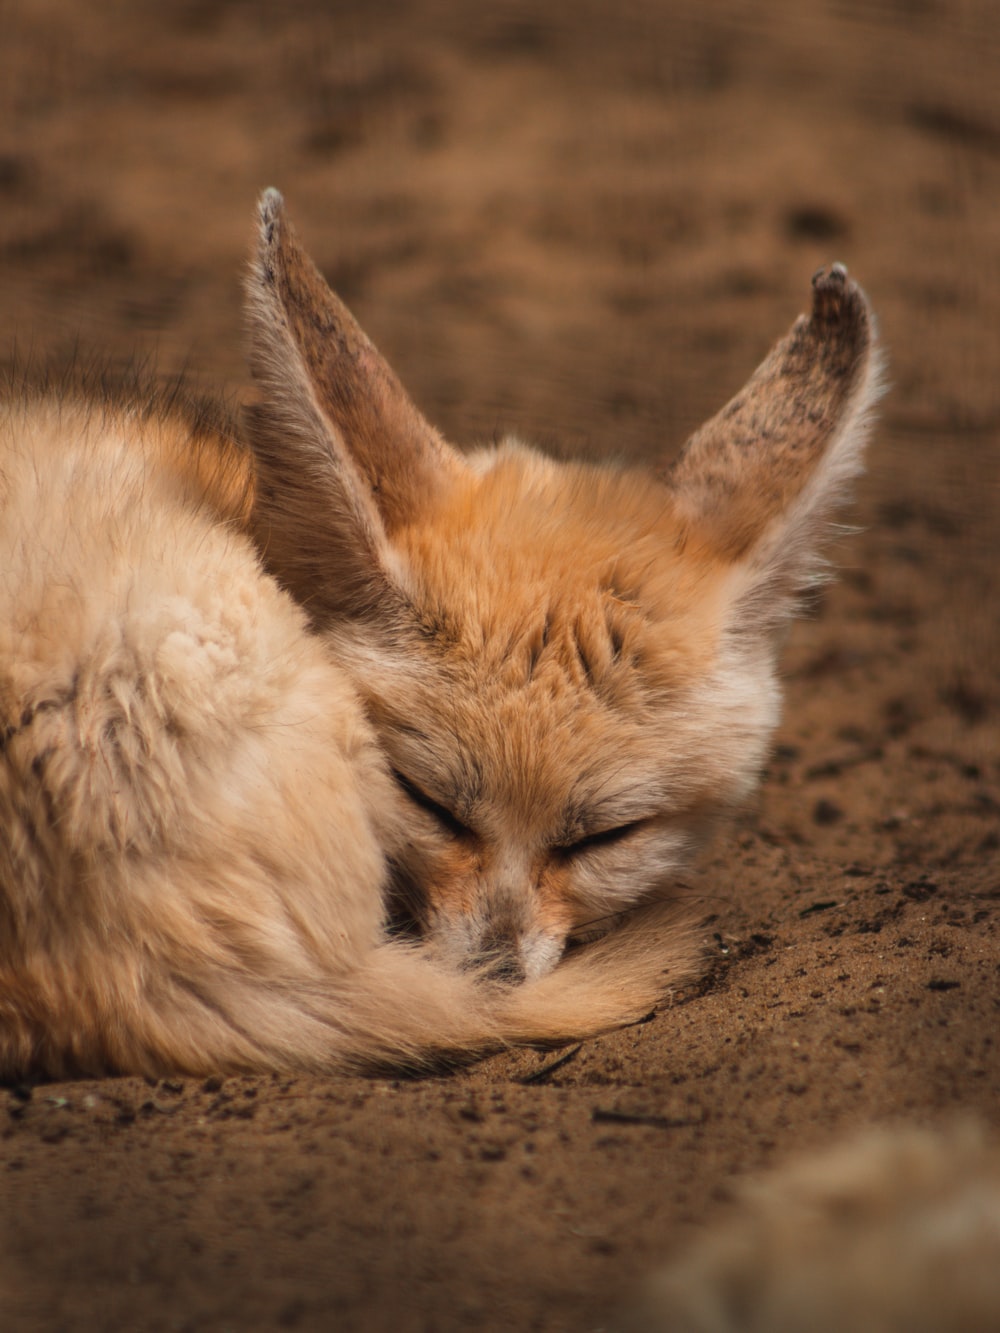 Fennec Fox Picture. Download Free Image